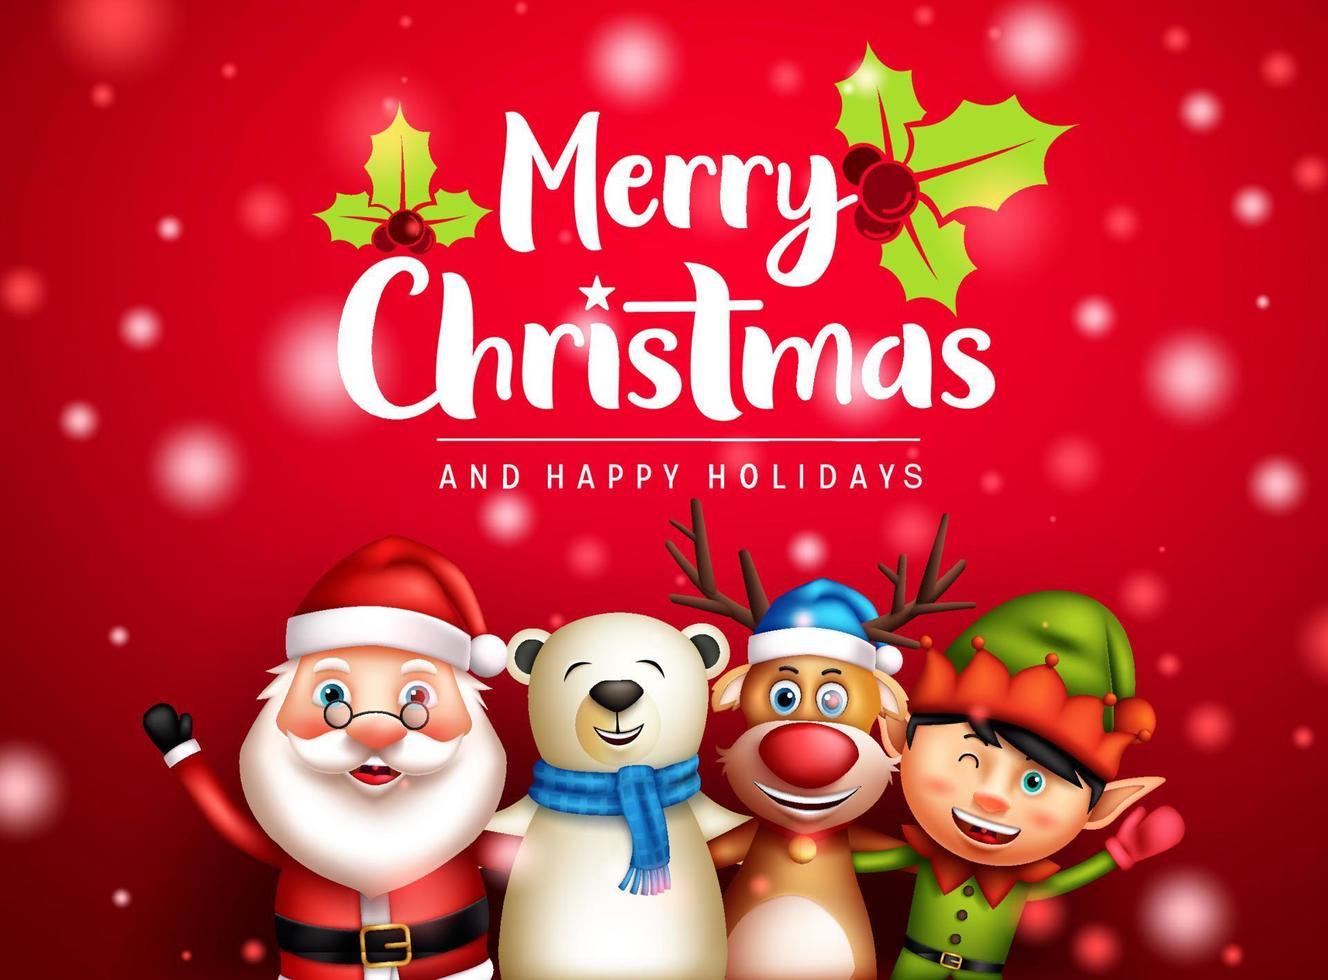 Christmas greeting characters vector design. Merry christmas text with santa claus, elf, polar bear and reindeer friends xmas character for happy holiday season design. Vector illustration.